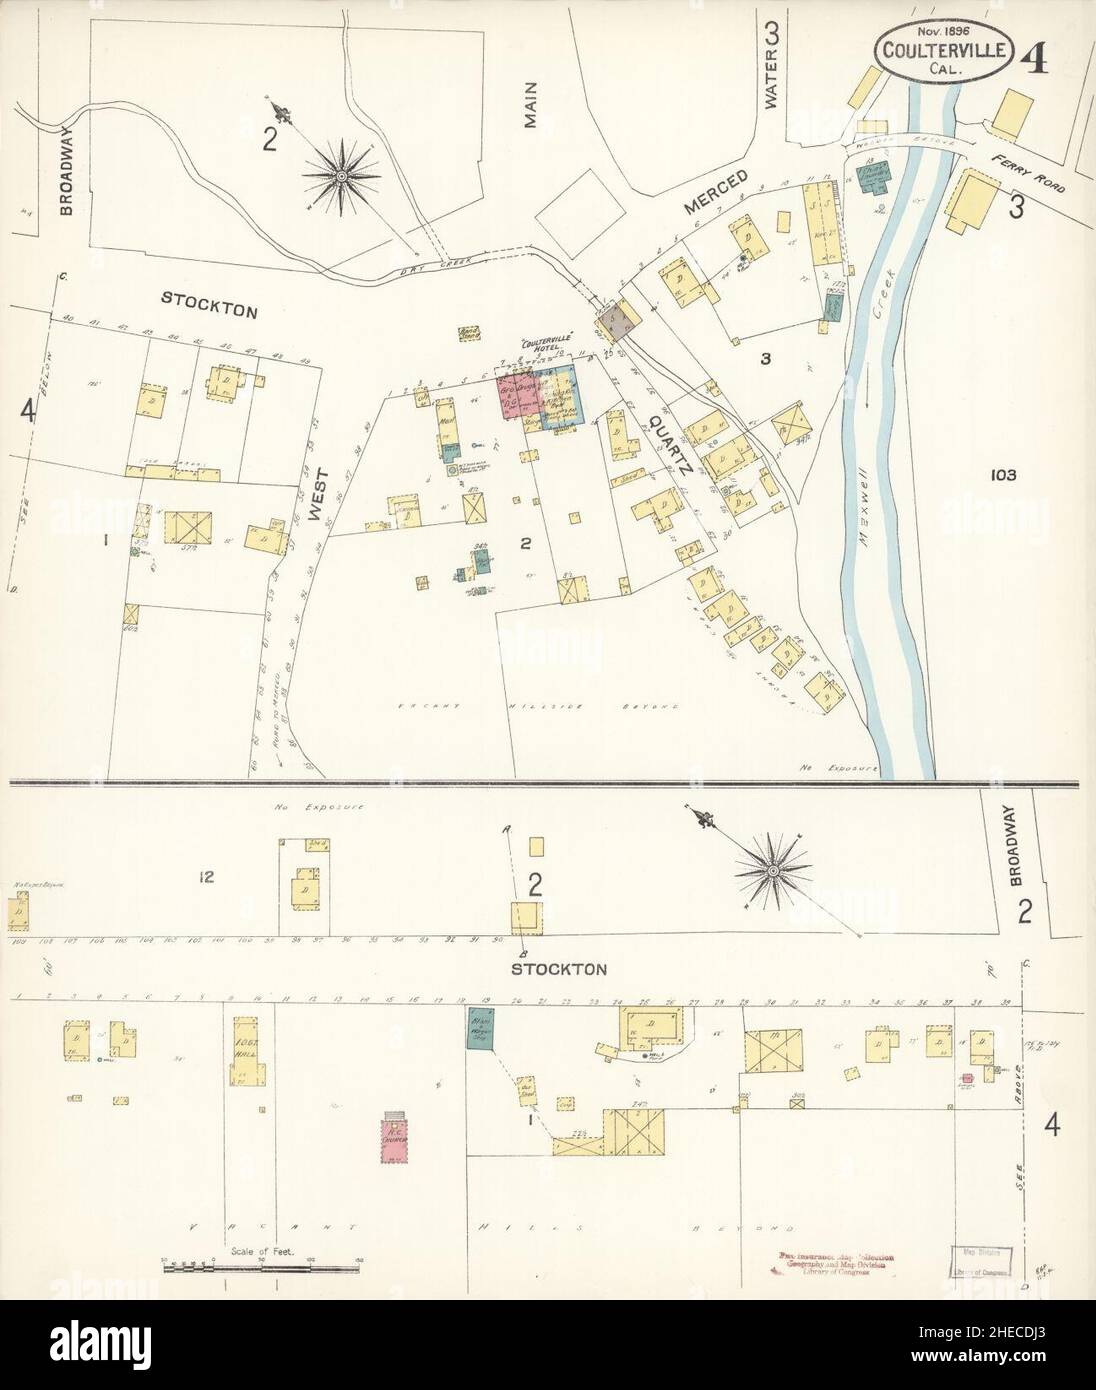 Sanborn Fire Insurance Map from Coulterville, Mariposa County, California. Stock Photo